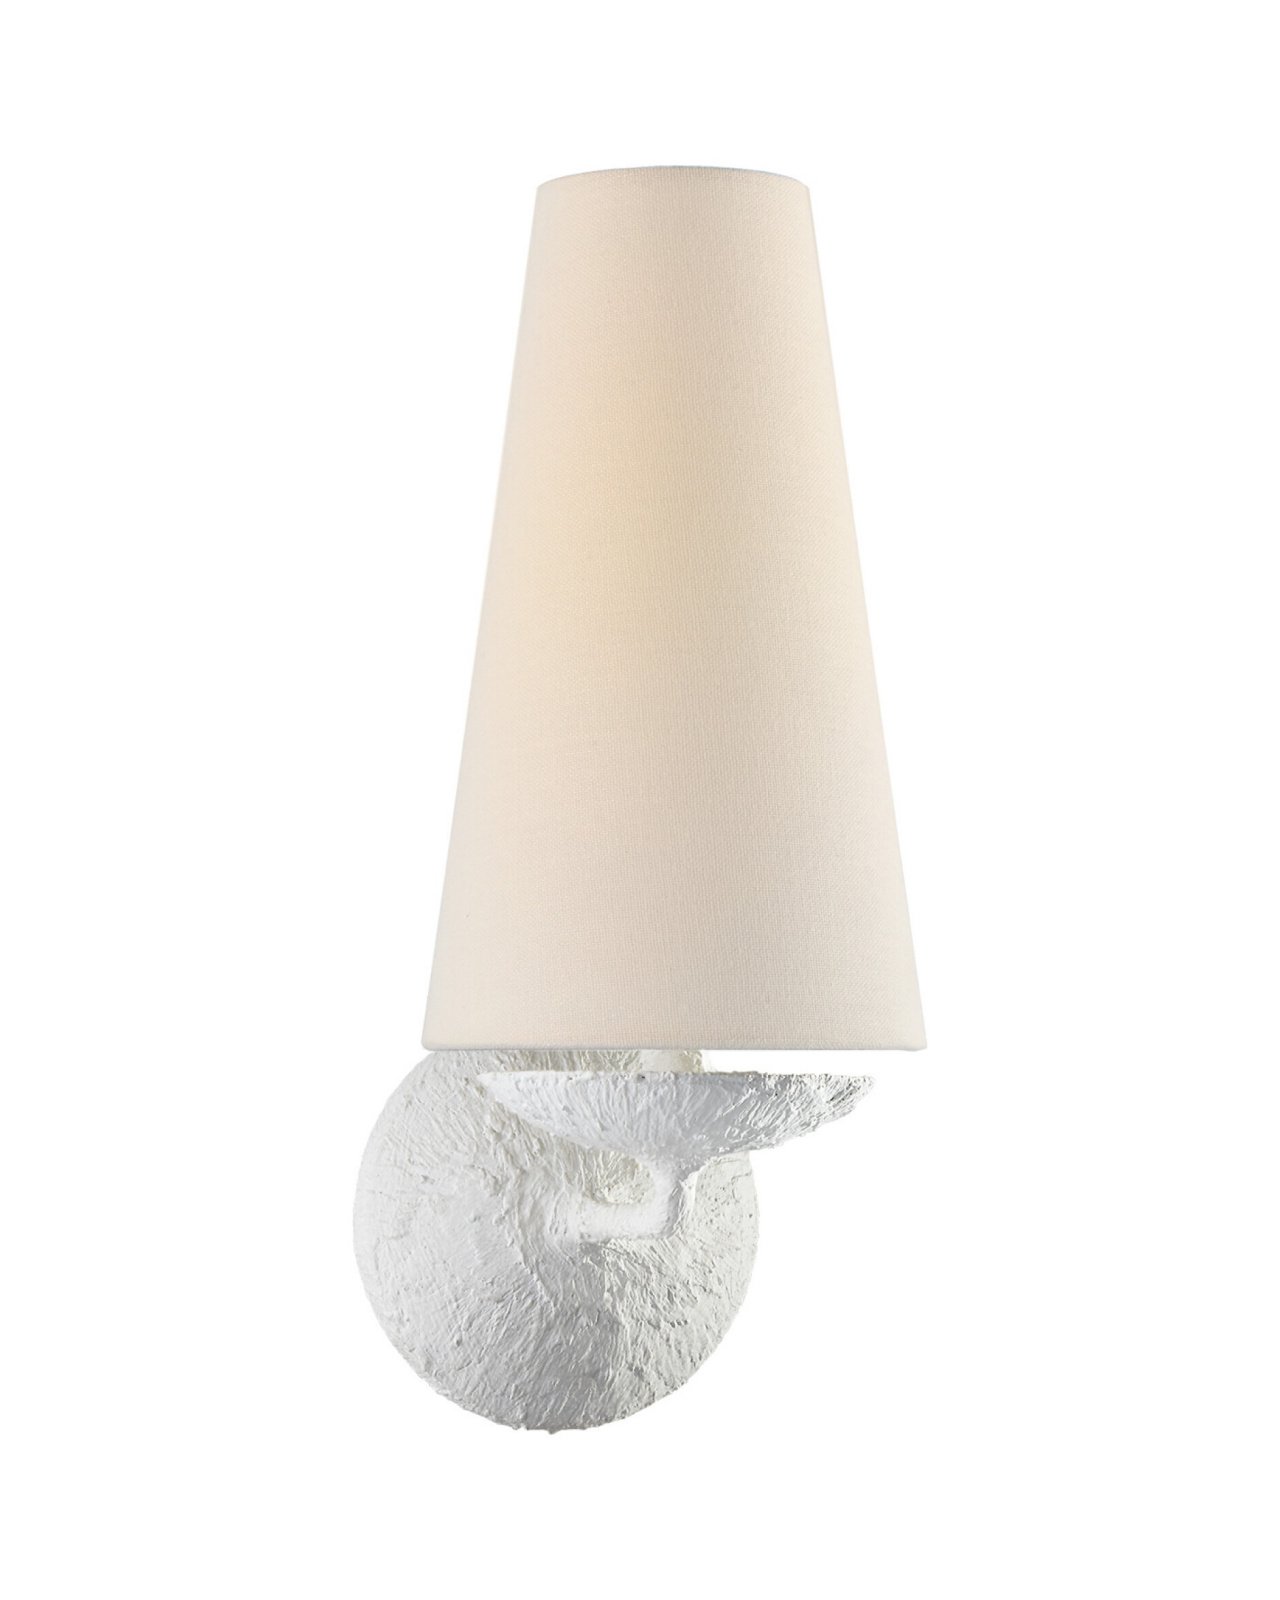 Fontaine Single Sconce Plaster